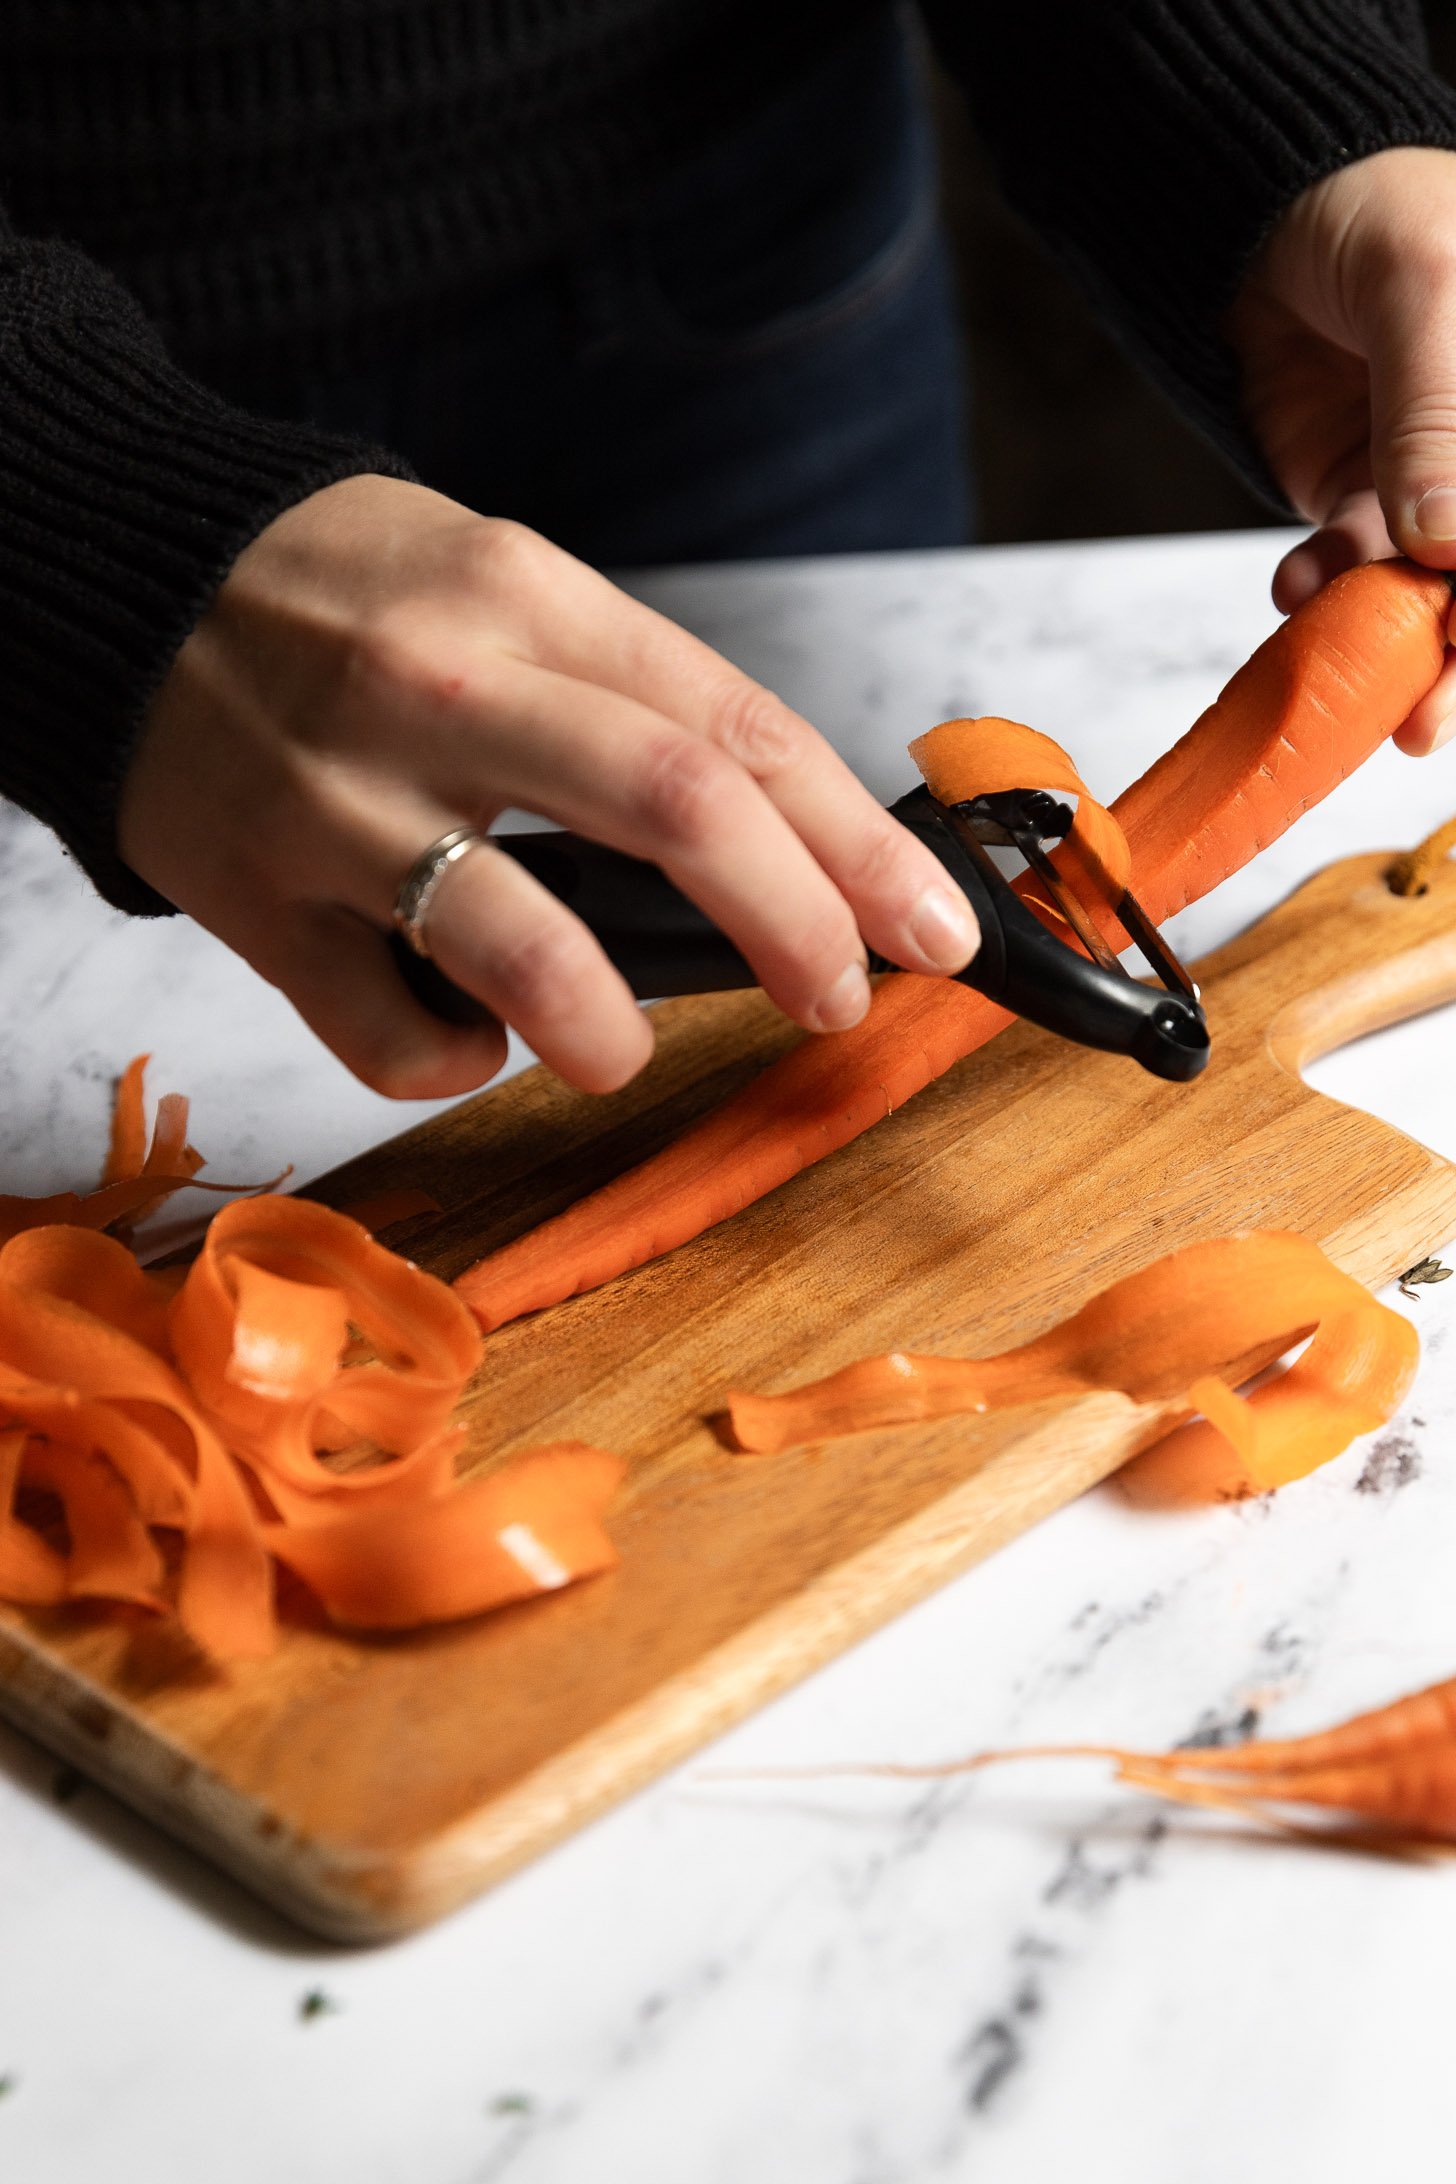 Hand using Y-peeler to make thin strips of carrots.